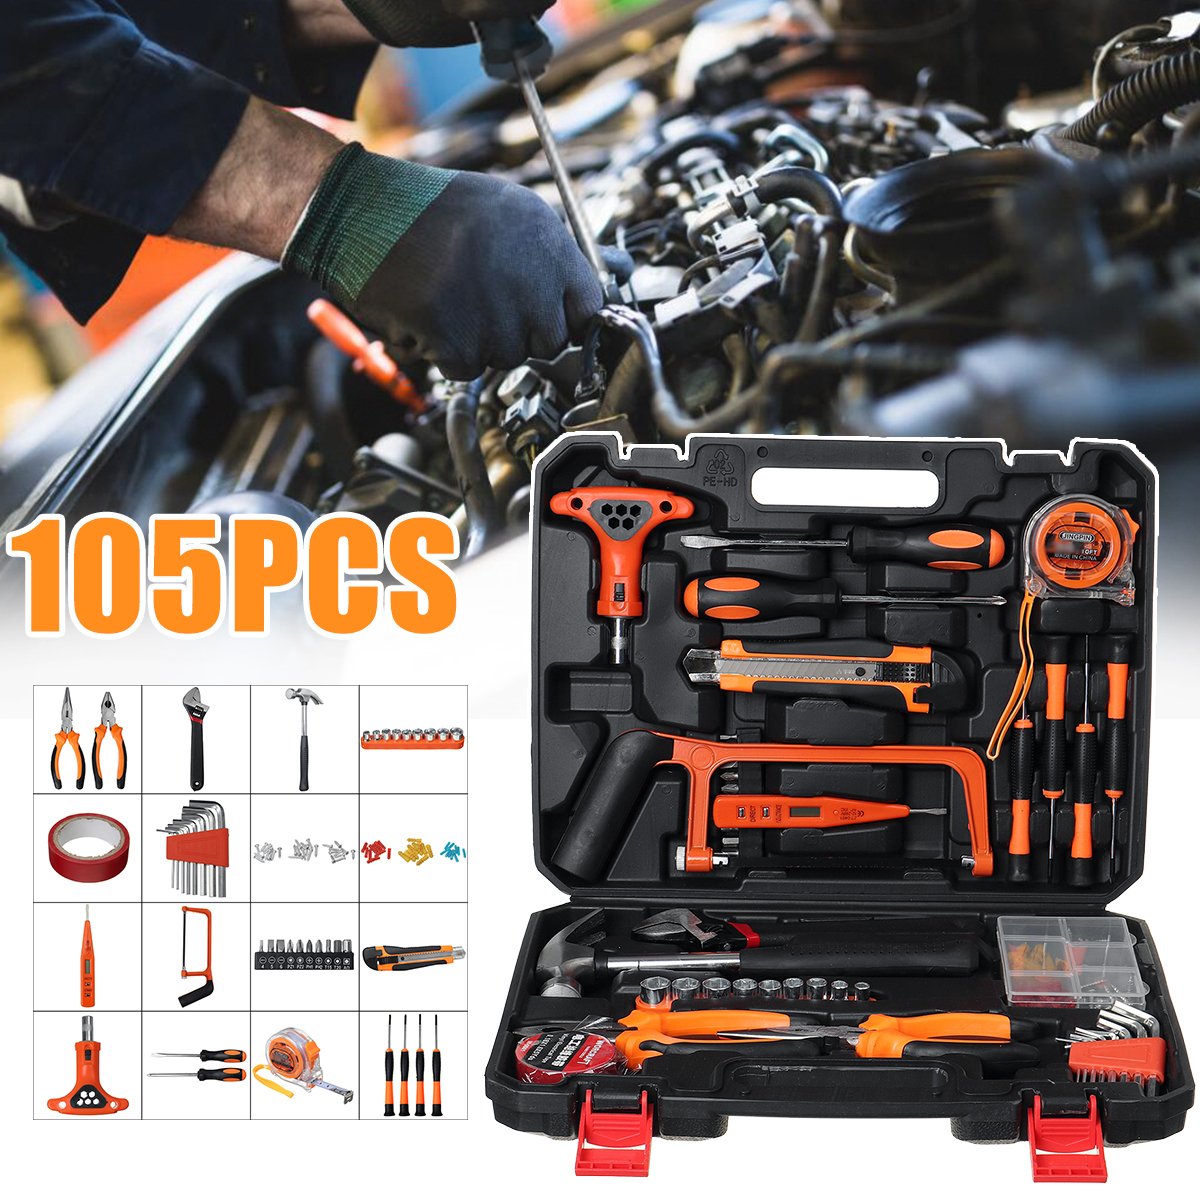 105Pcs-Hardware-Tools-Kit-Screwdriver-Wrench-w-Storage-Box-Applied-To-Home-Outdoors-Car-1708391-1